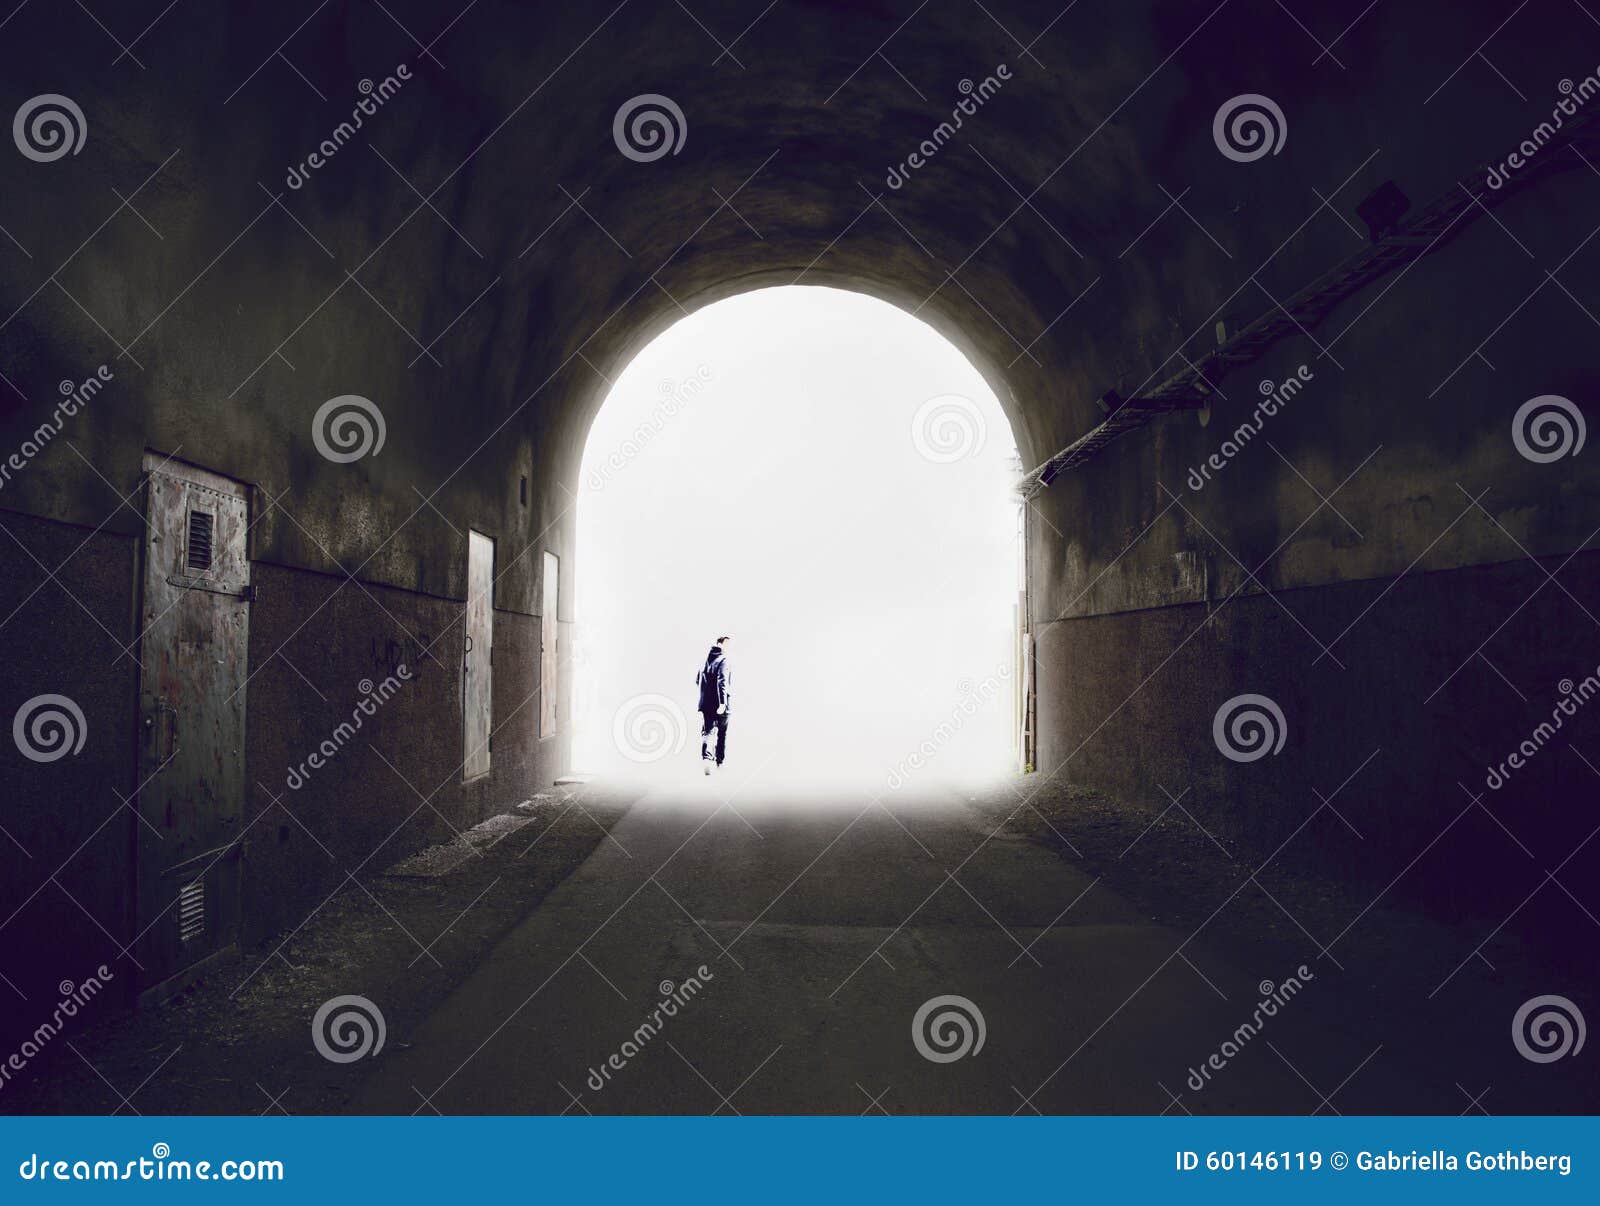 silhouette of a man disappearing into the light at the end of a tunnel.